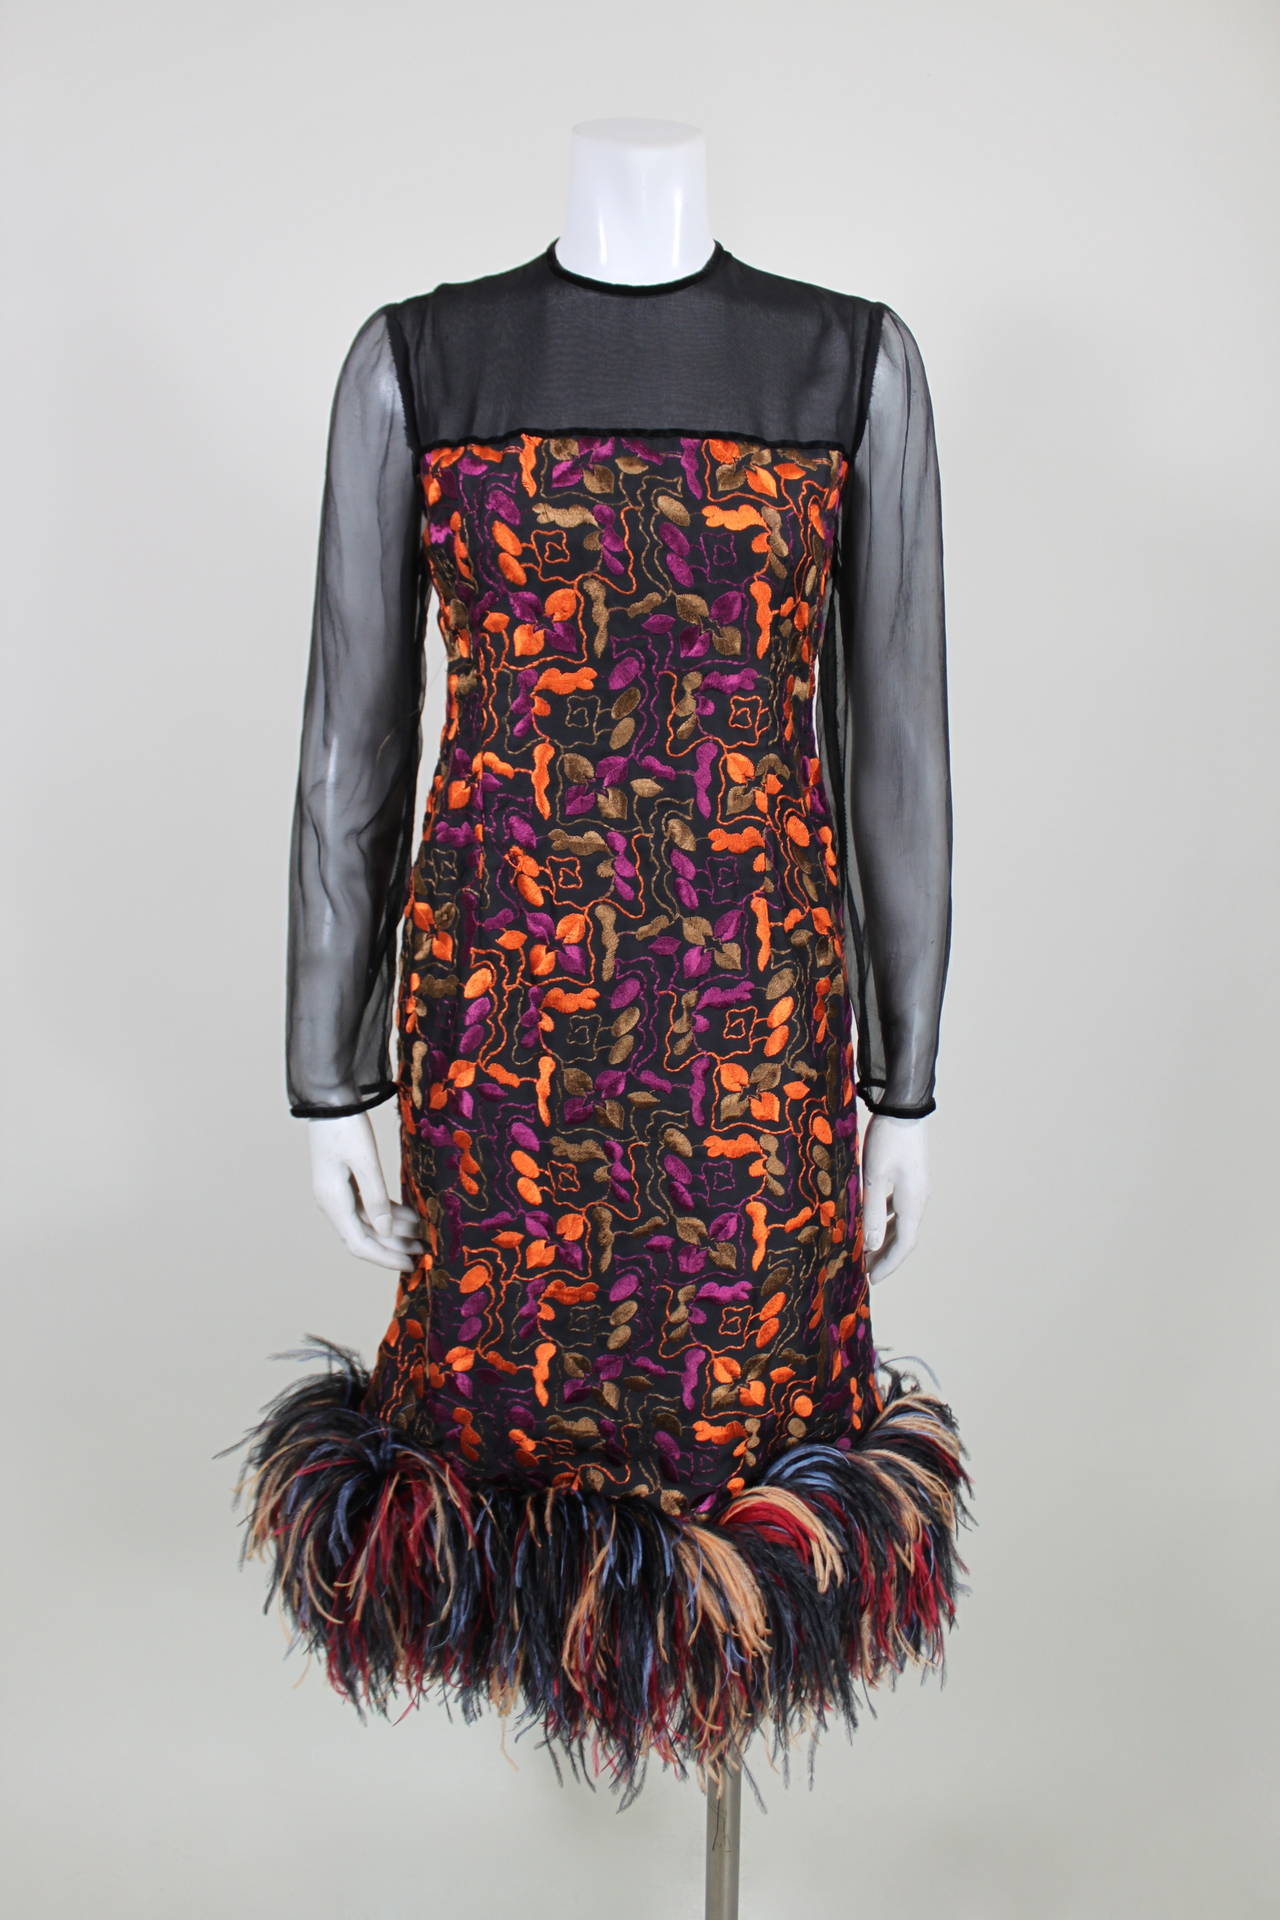 A vibrant, beautifully embroidered cocktail dress featuring a sheer bodice and sleeves. The hem of the dress is trimmed in full, colorful ostrich feathers. Zips and buttons in the back. Fully lined. 
